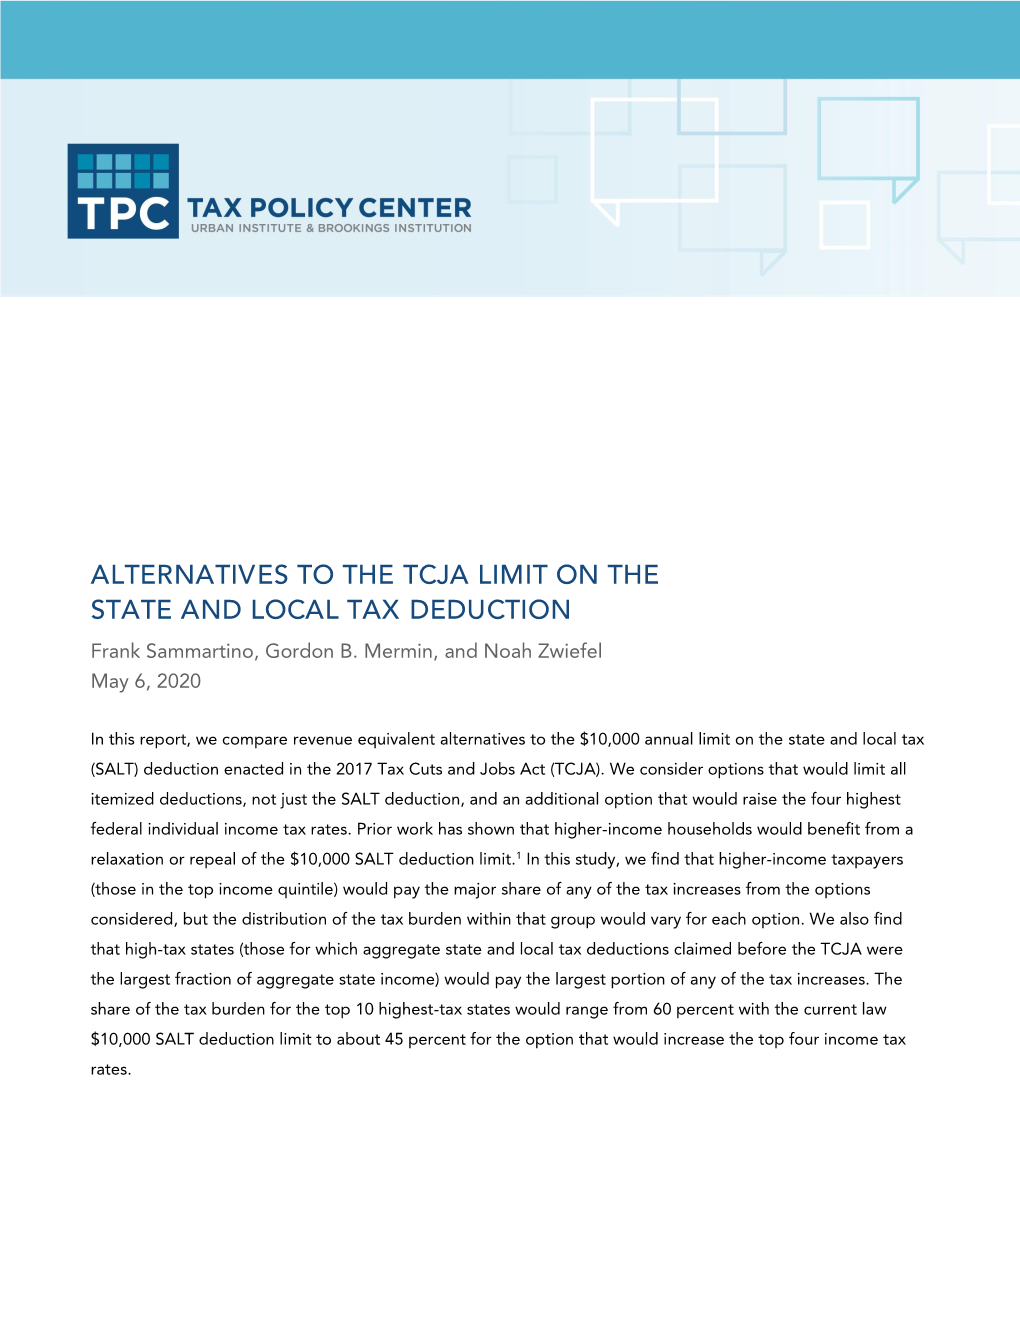 ALTERNATIVES to the TCJA LIMIT on the STATE and LOCAL TAX DEDUCTION Frank Sammartino, Gordon B